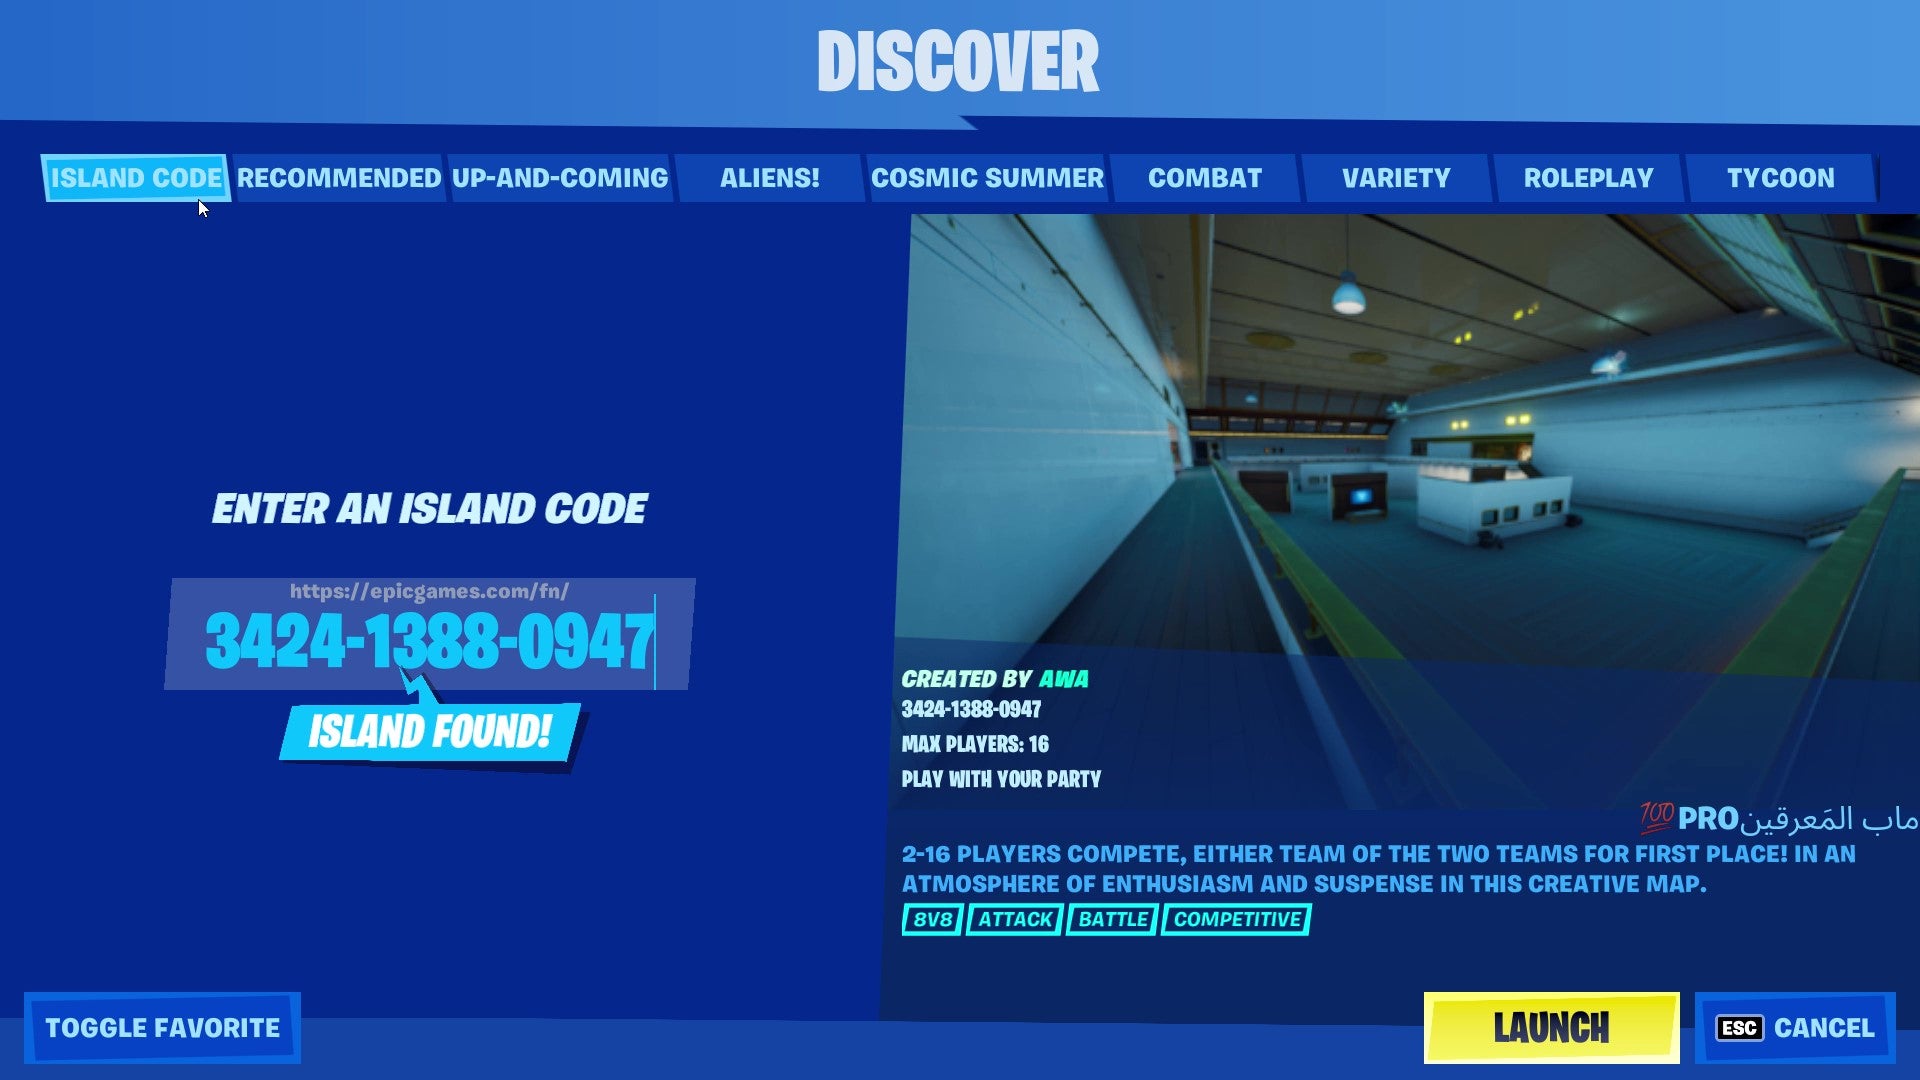 The Island Code option in Fortnite Creative's Discover page. Text indicates an island has been found and the server is ready to launch.